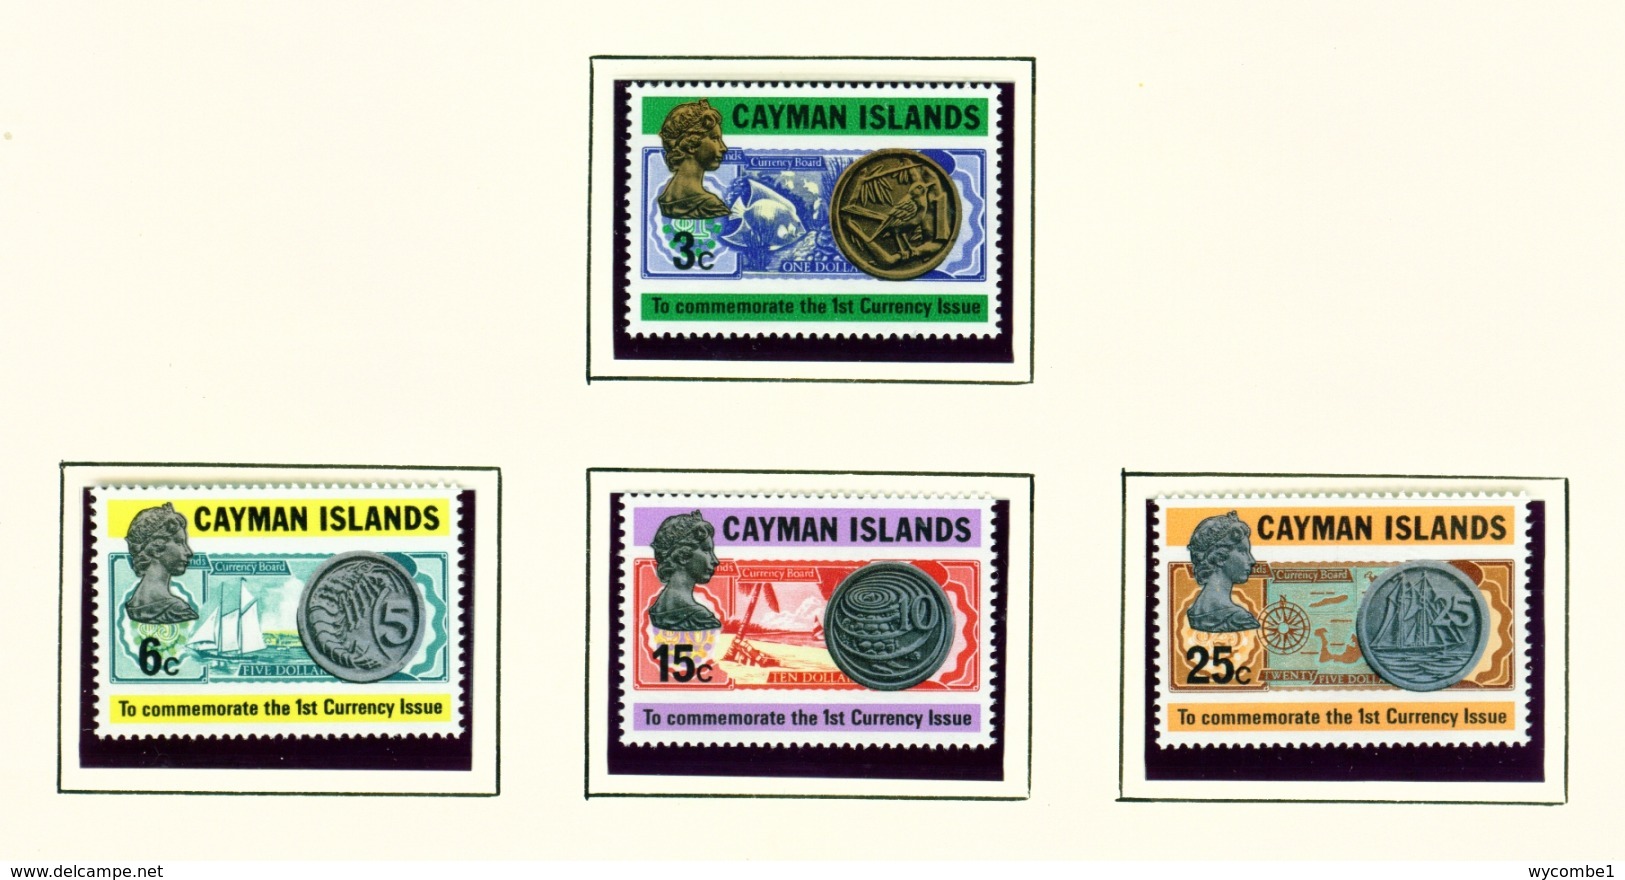 CAYMAN ISLANDS - 1972 Coins Set Unmounted/Never Hinged Mint - Cayman Islands